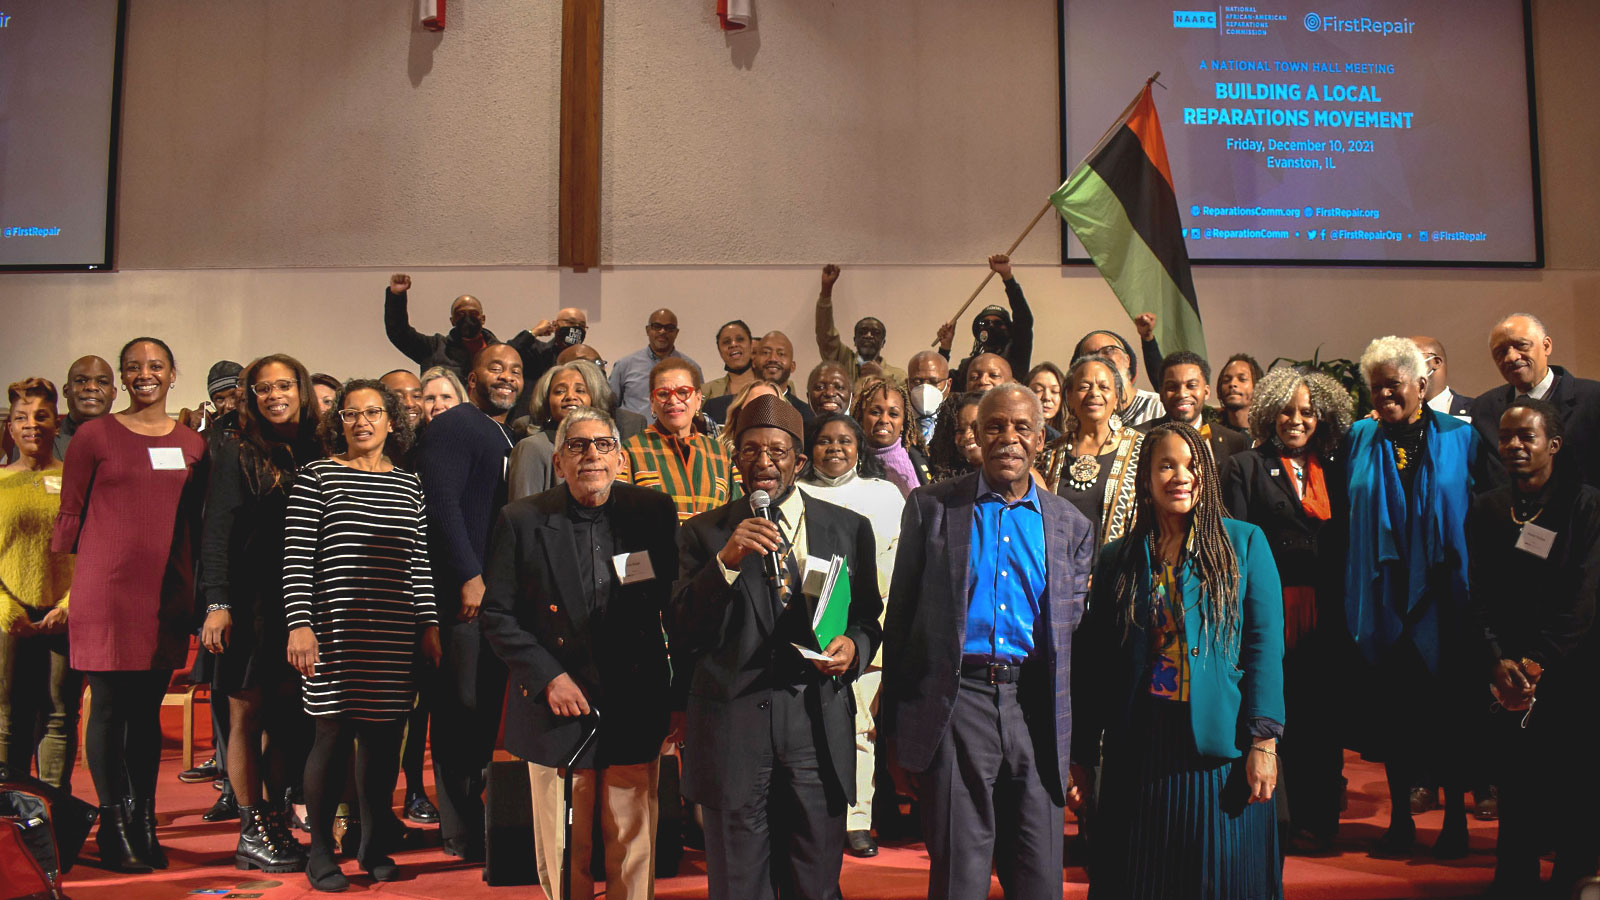 December 2021 National Town Hall Meeting “Building a Local Reparations Movement”. First Church of God CLC, Evanston, IL.